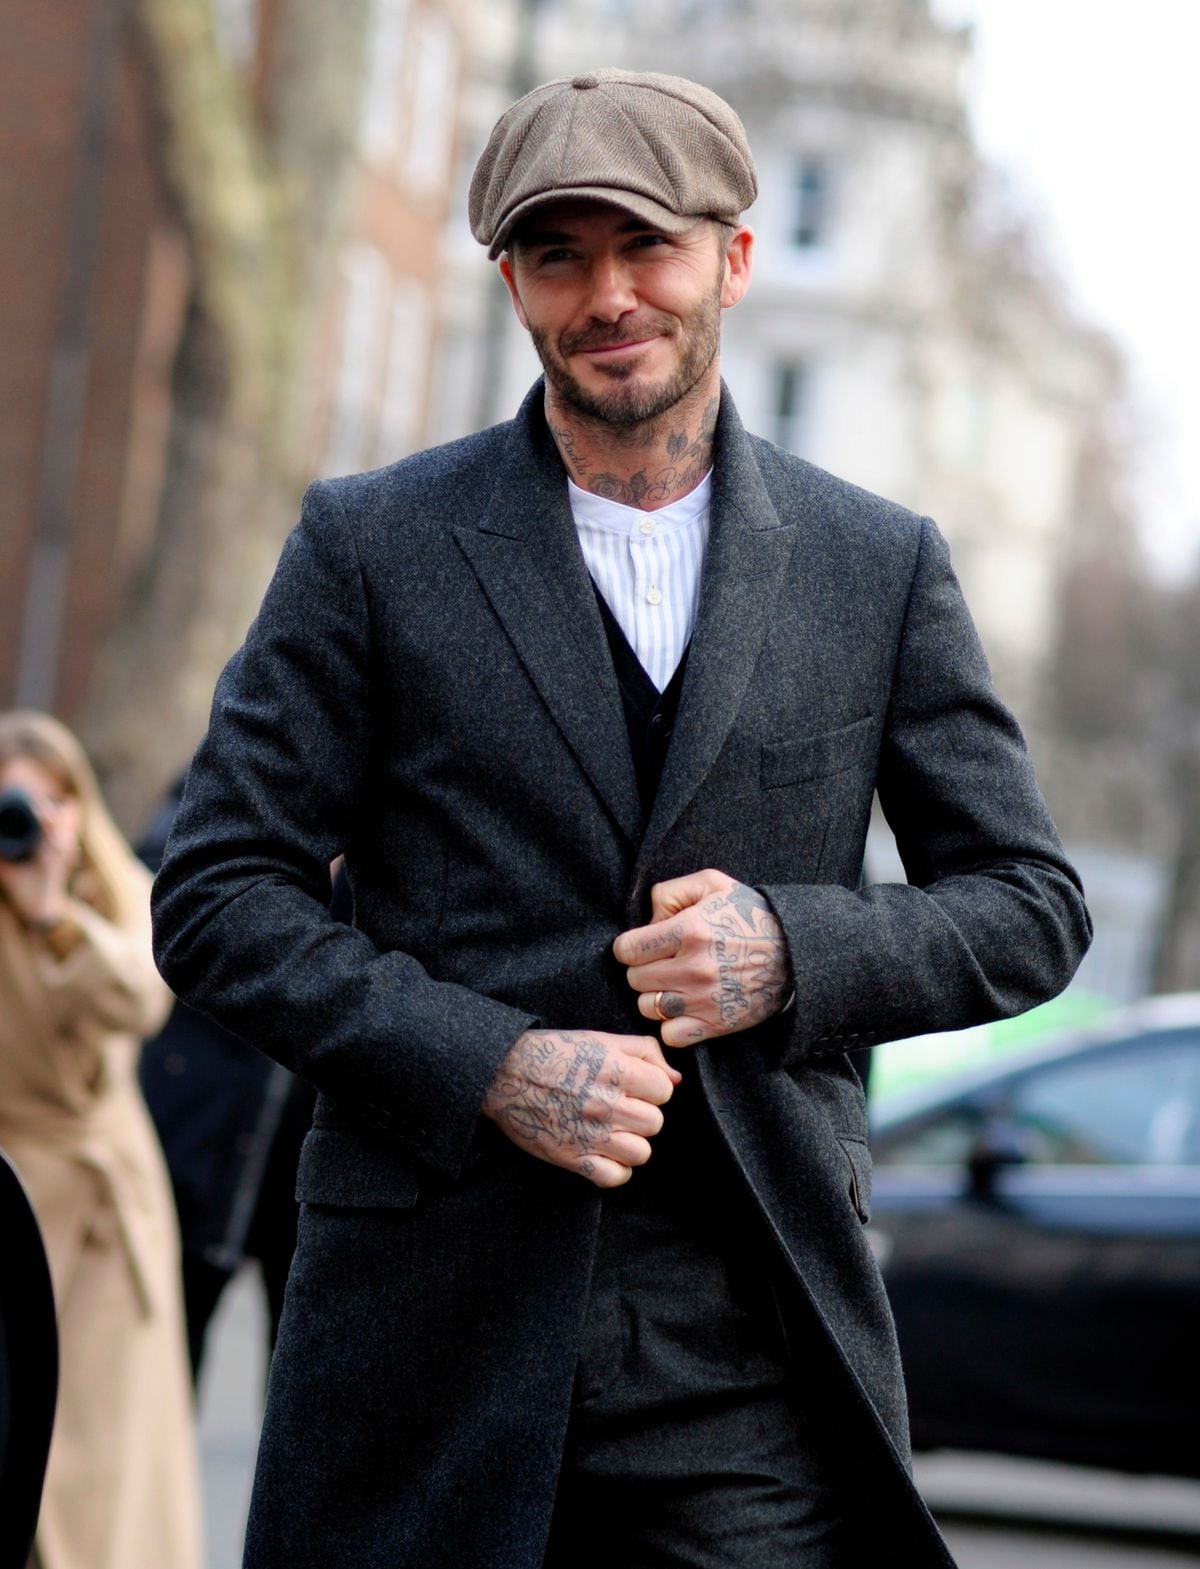 David Beckham wins another cap as he launches new Peaky ...